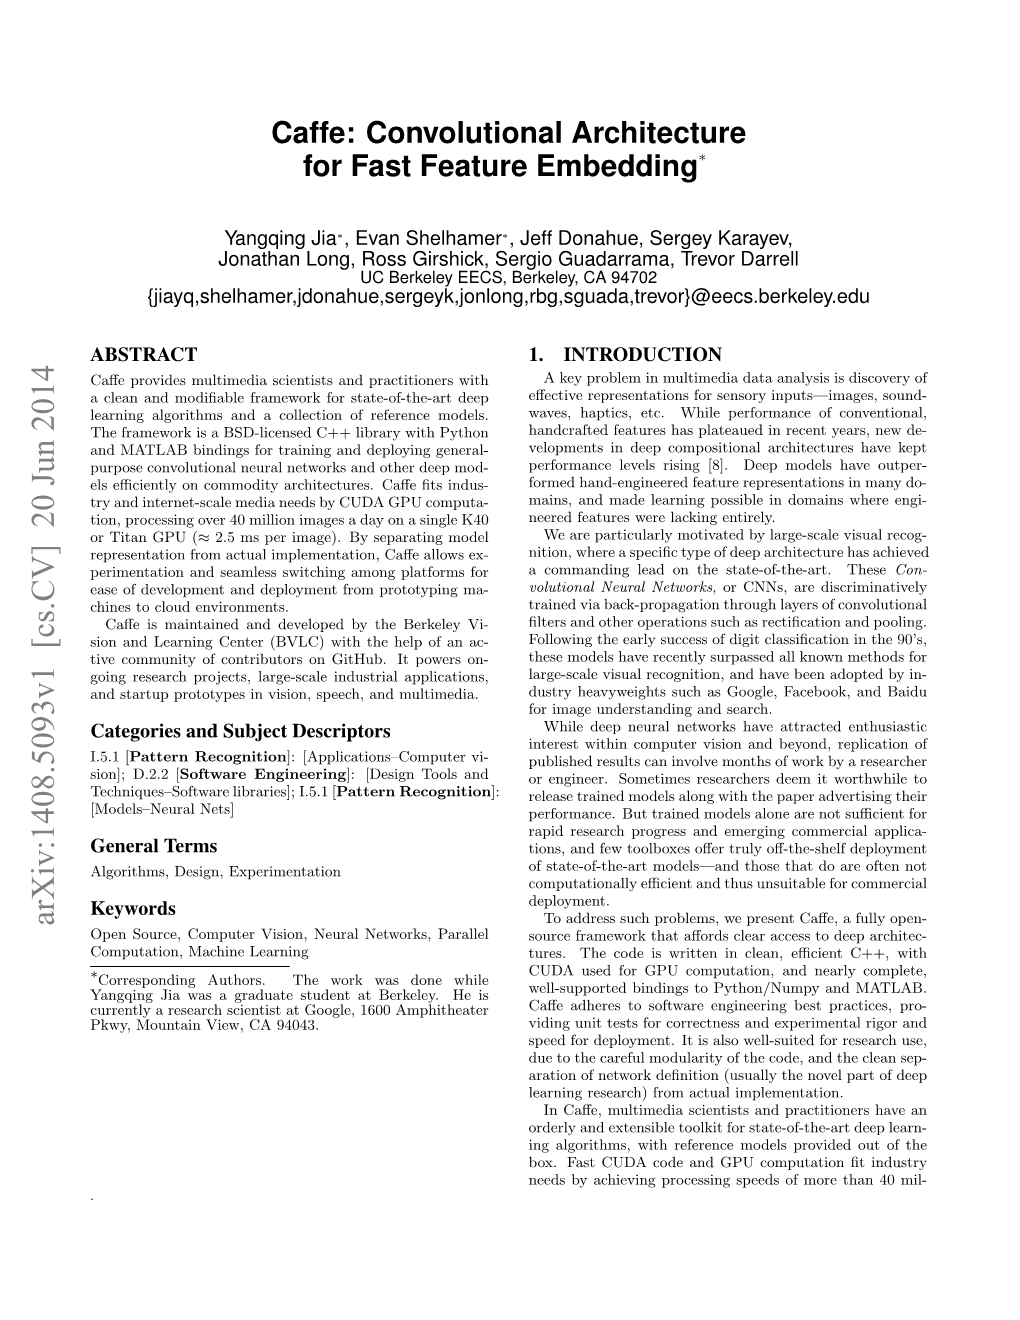 Caffe: Convolutional Architecture for Fast Feature Embedding∗